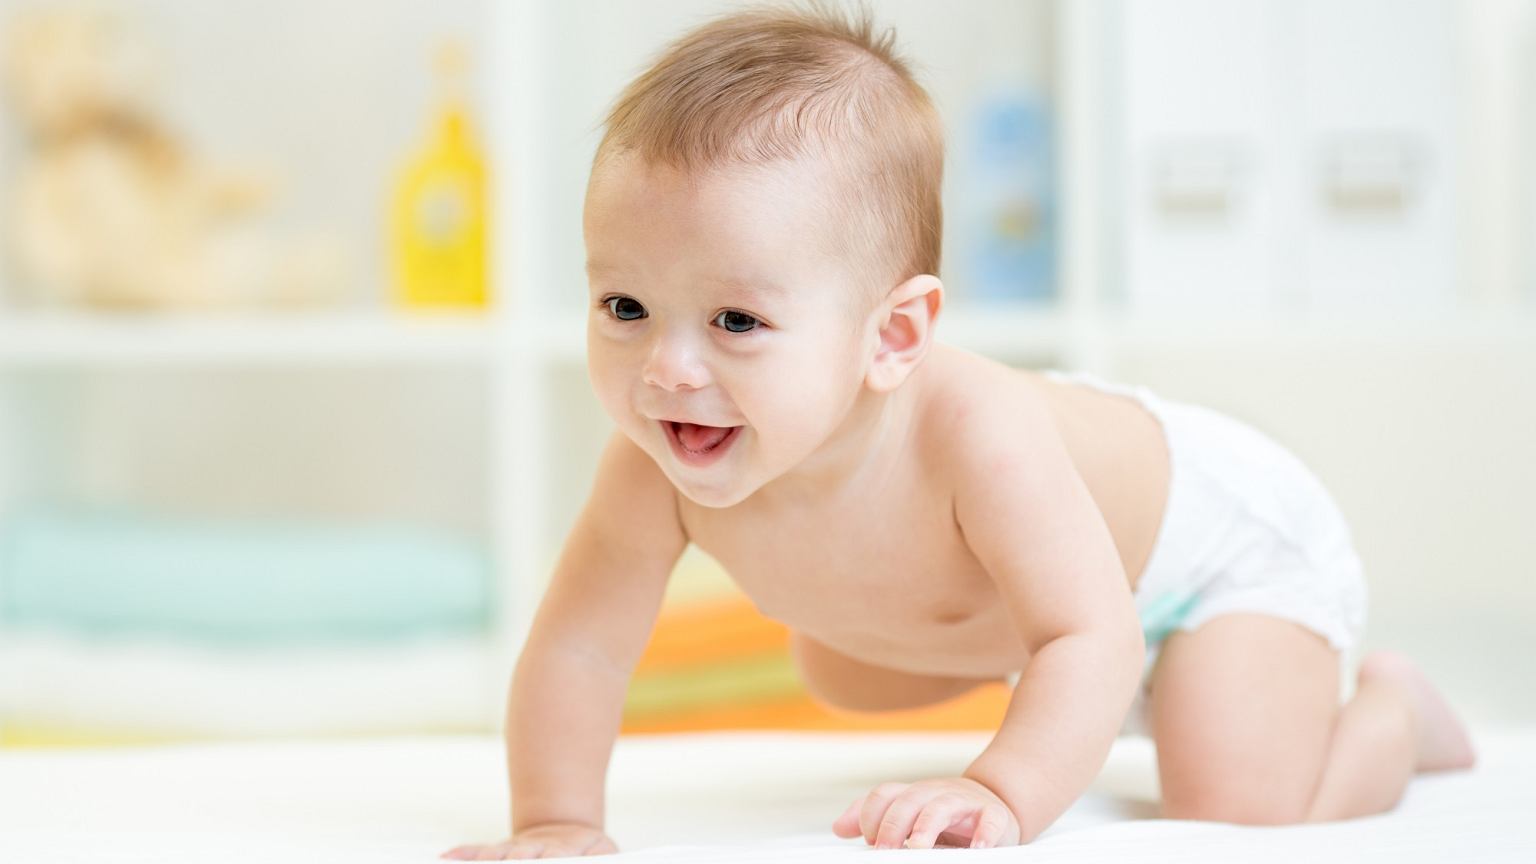 New diapers can notify parents that the baby wet them